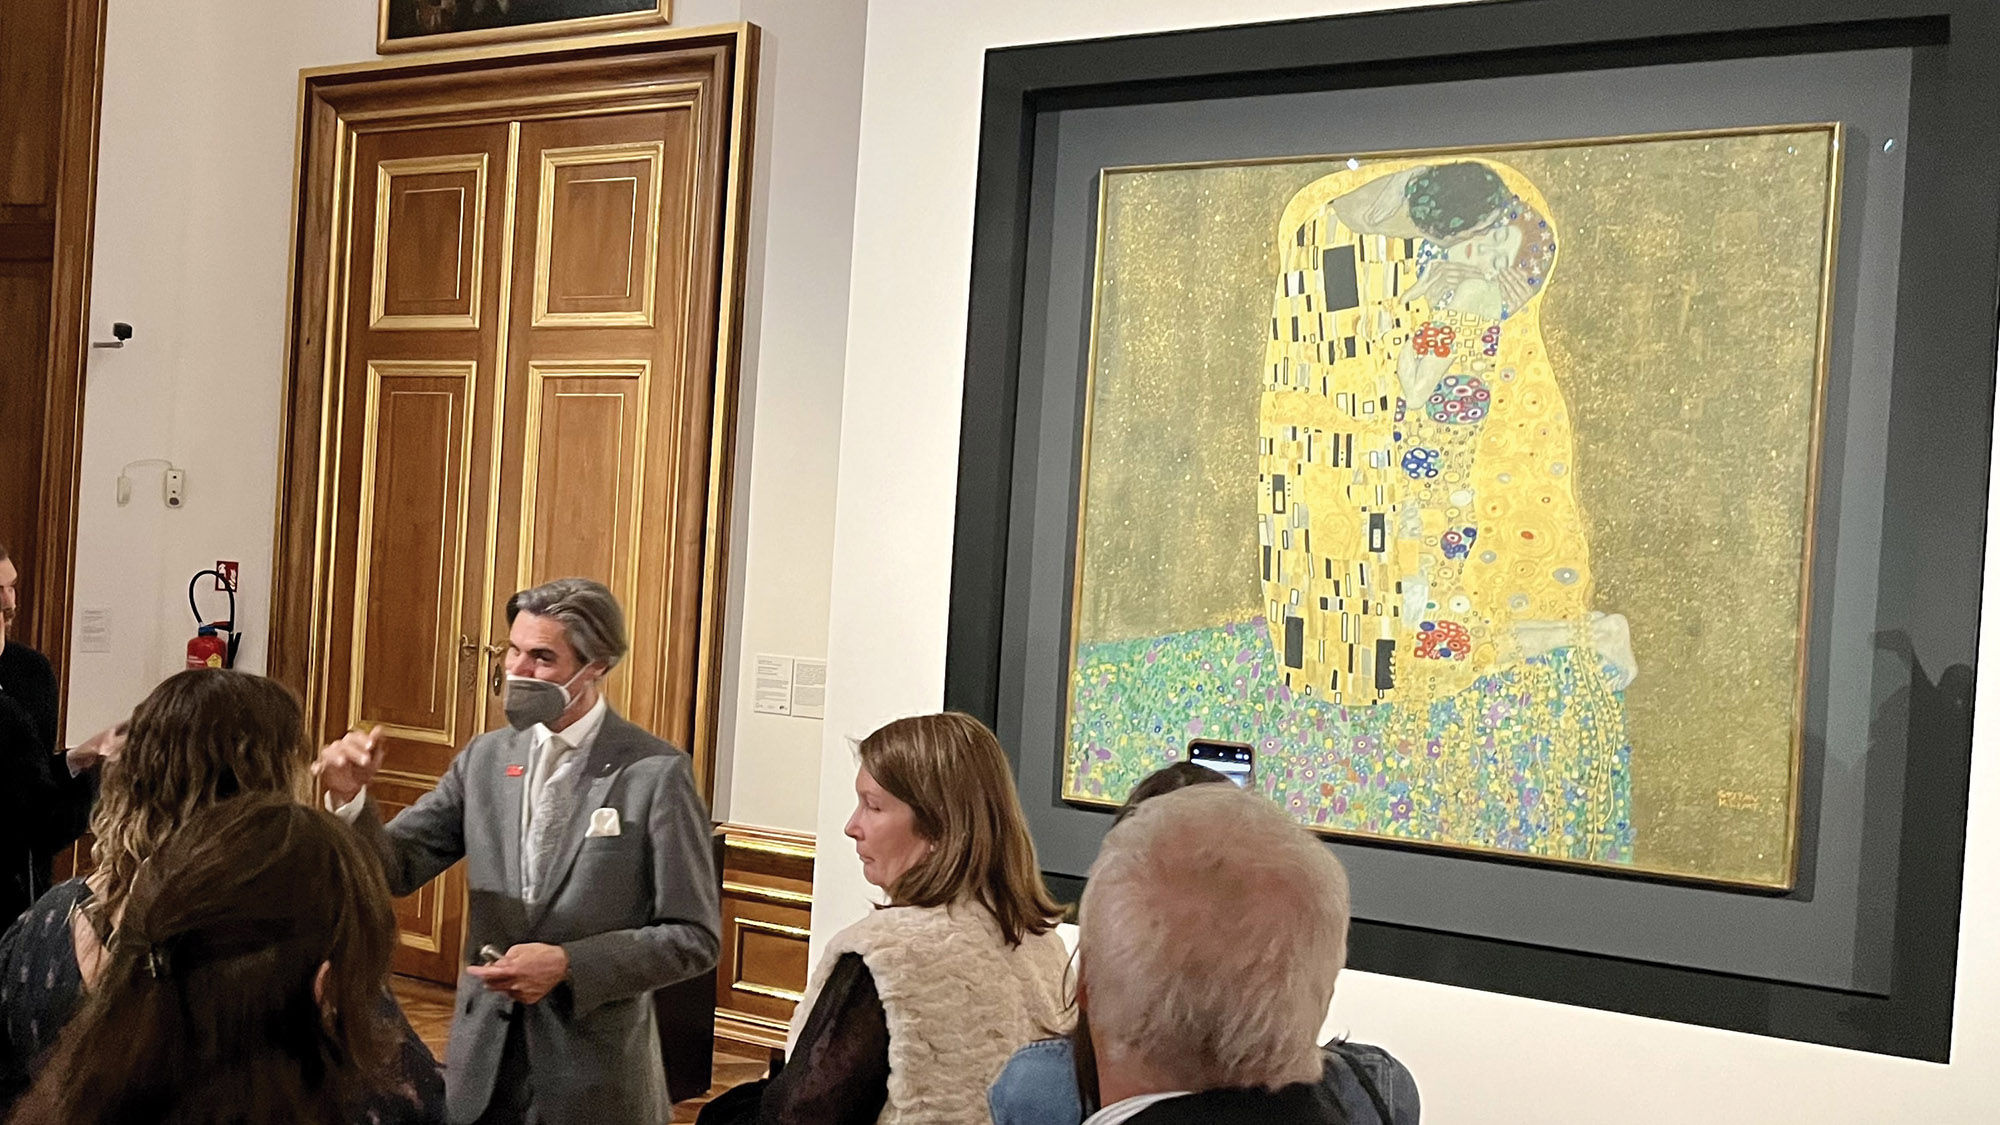 Christening guests got an exclusive look at Gustav Klimt's "The Kiss" on a private tour of Vienna's Belvedere Palace Museum.